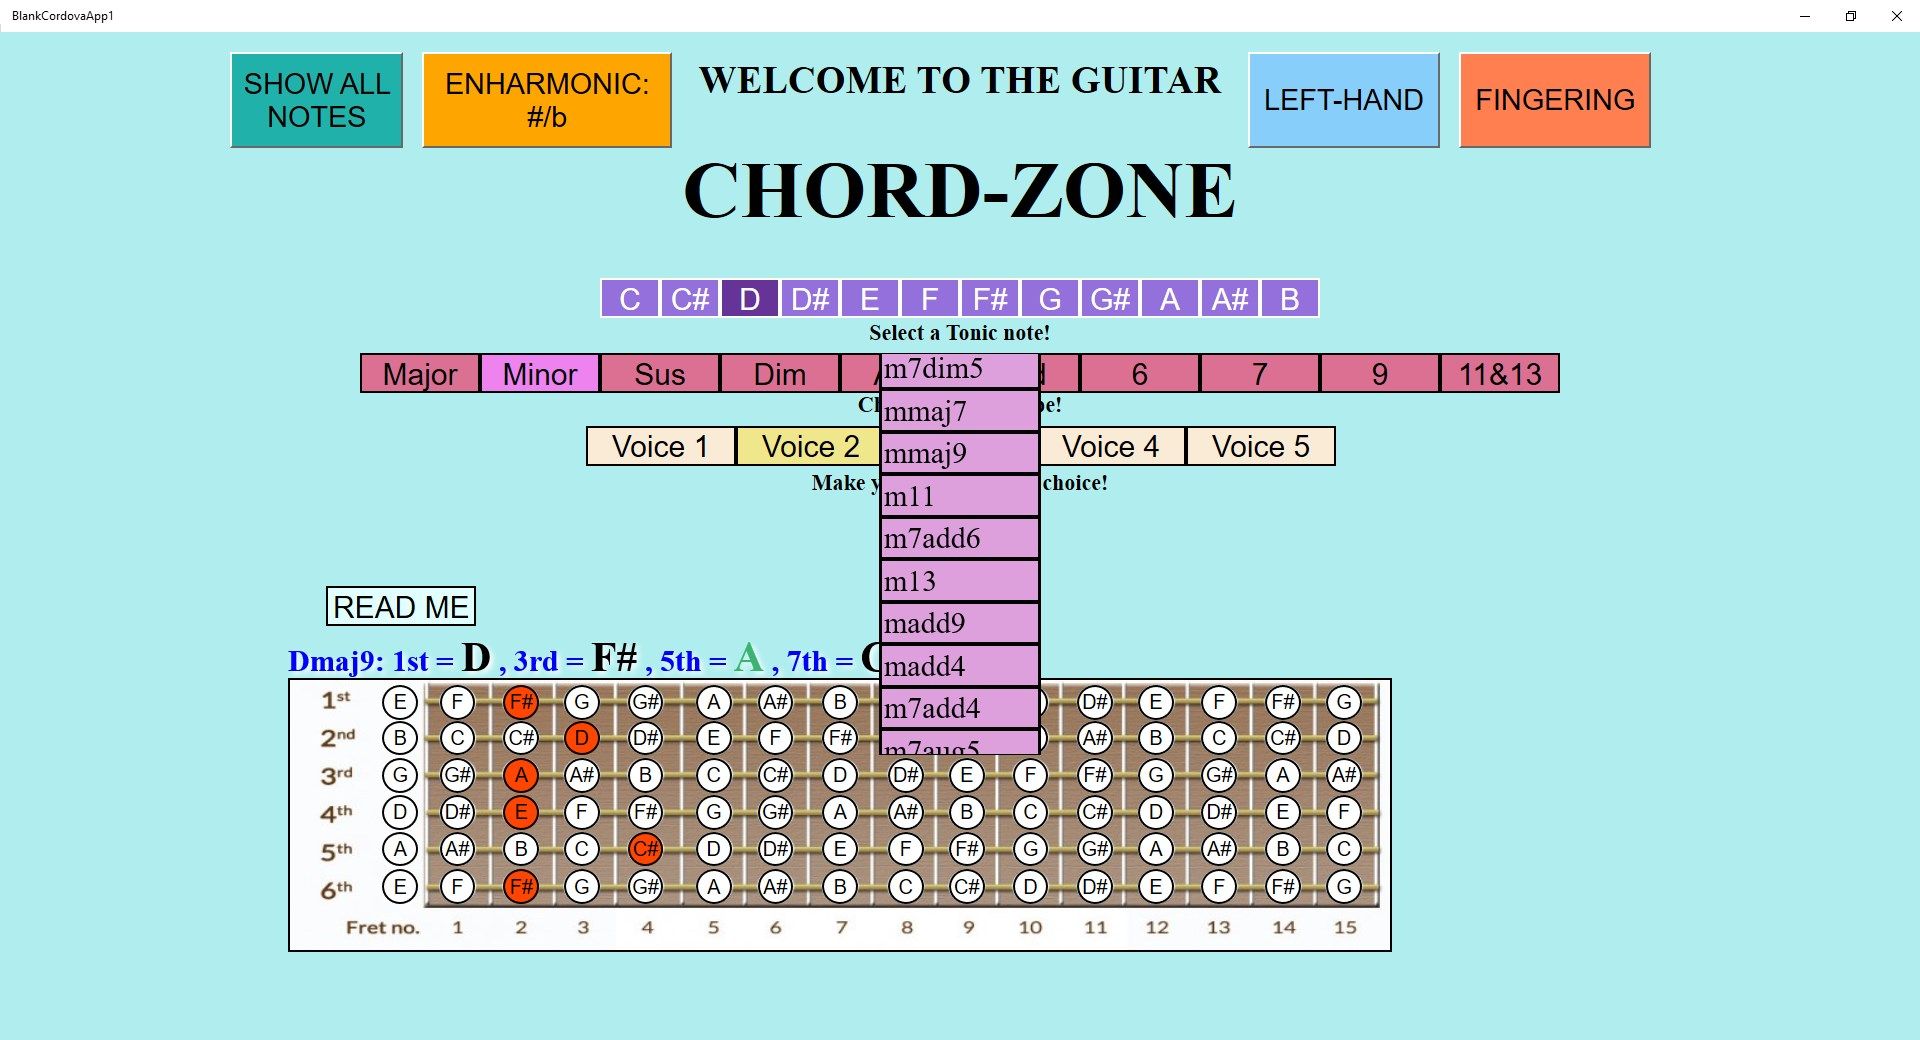 This screenshot shows one of the scrollable dropdown menus used to select the chord type. There are 48 unique chord types offered, and many of them are found under multiple categories.